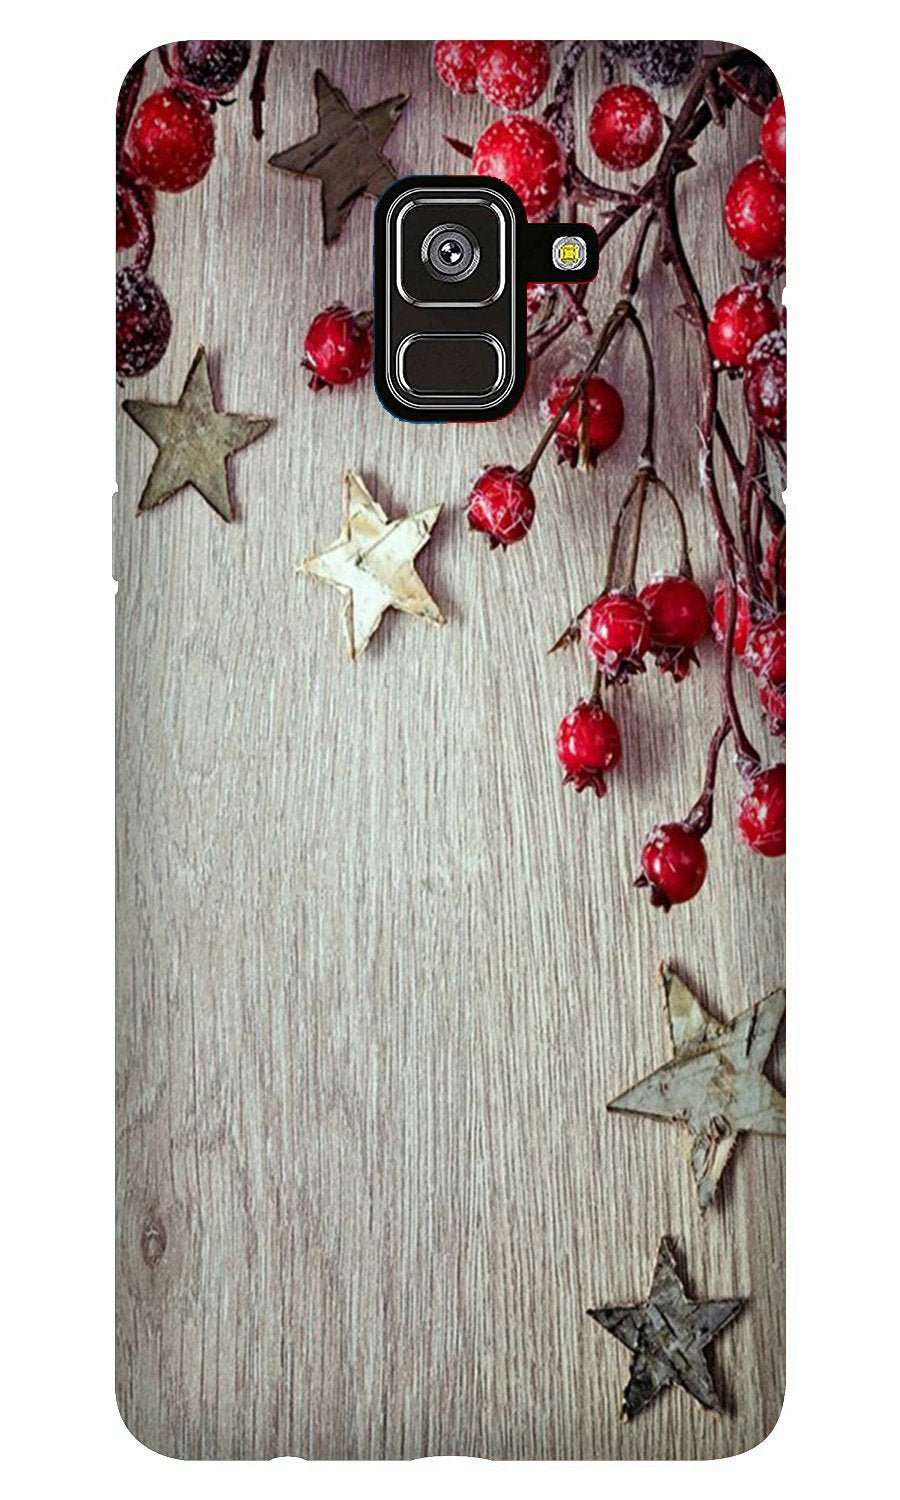 Stars Case for Galaxy A8 Plus